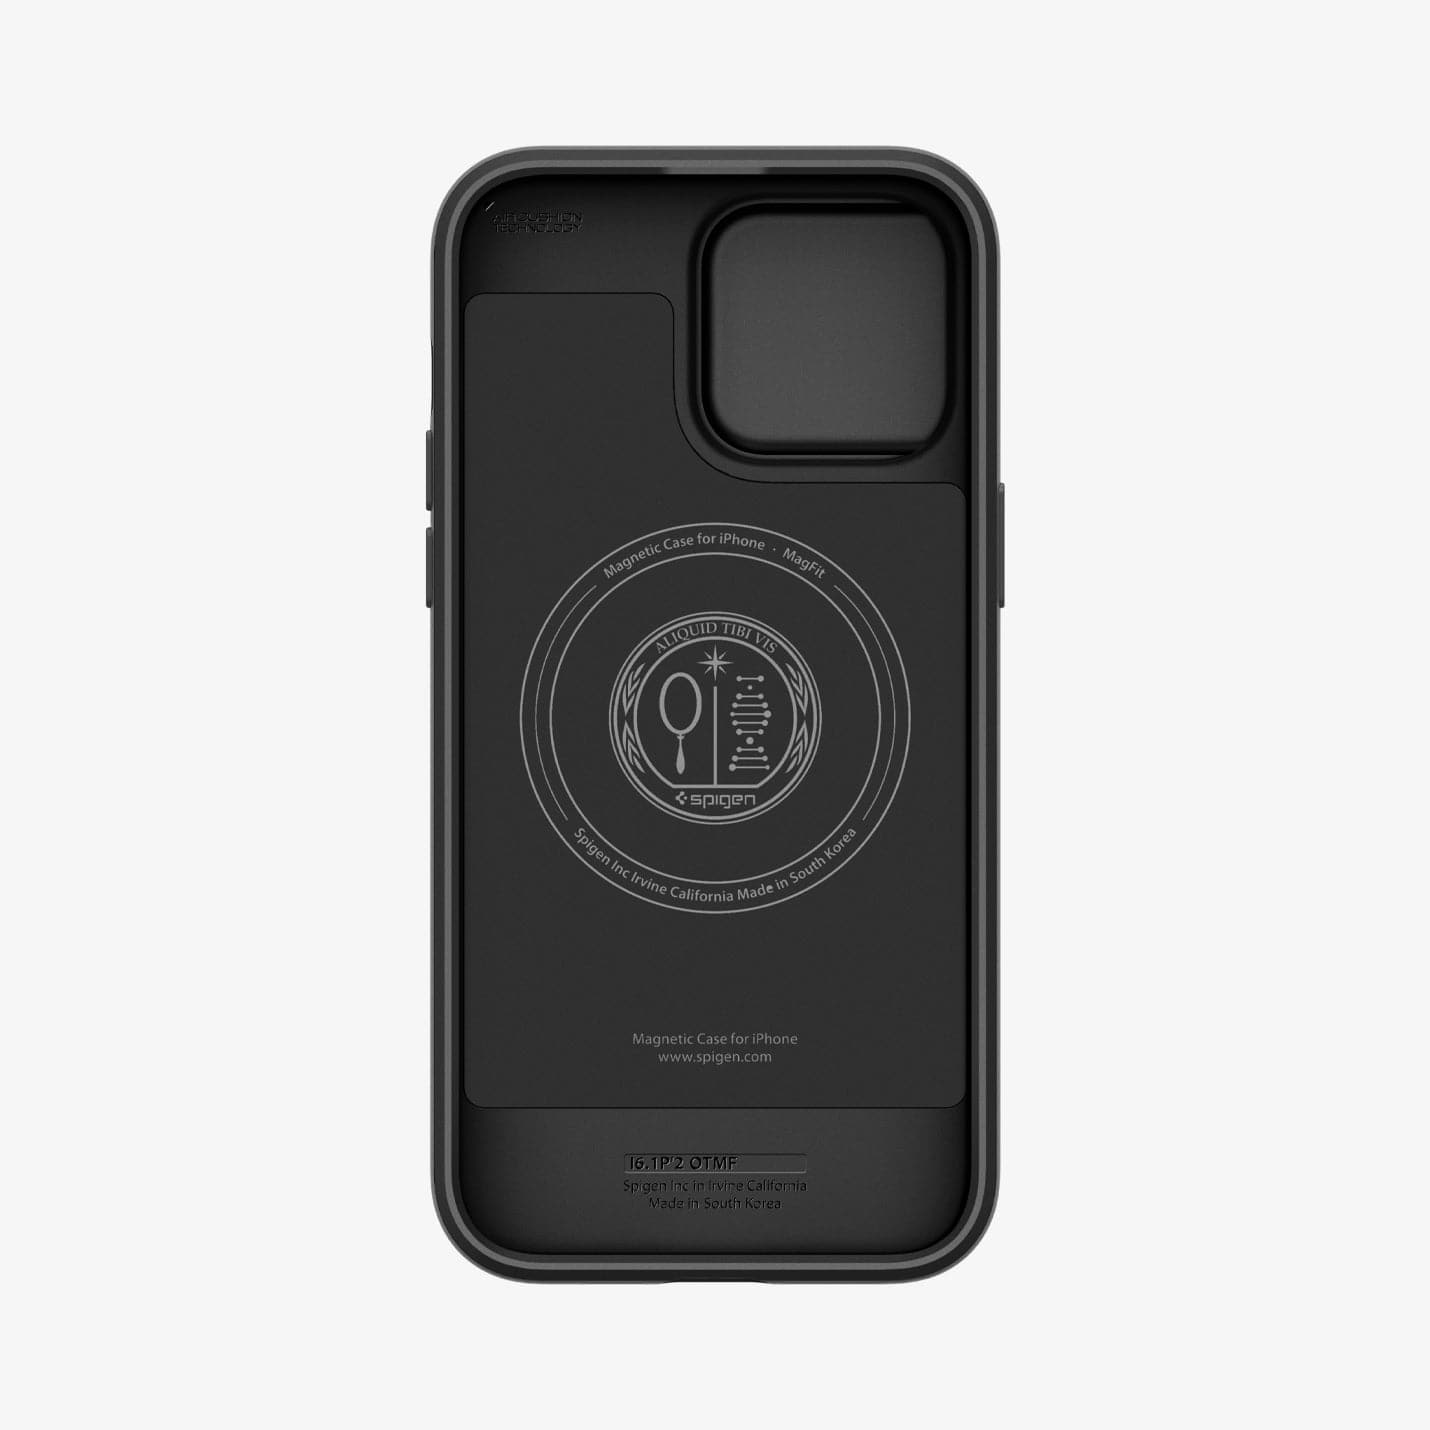 ACS04848 - iPhone 14 Pro Max Case Optik Armor (MagFit) in black showing the inside of case